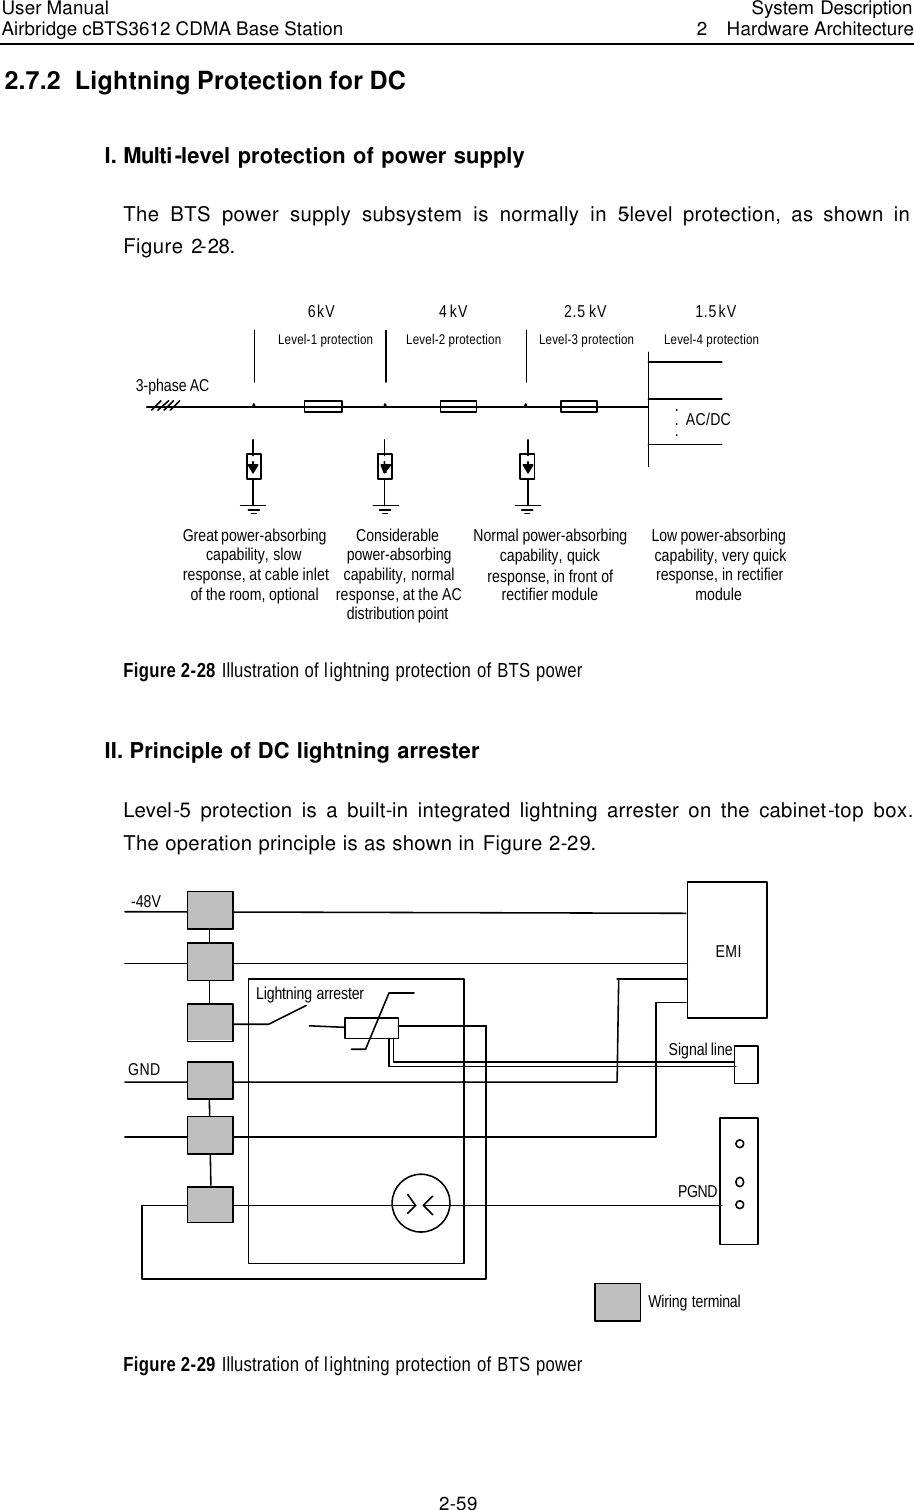 User Manual Airbridge cBTS3612 CDMA Base Station   System Description2  Hardware Architecture 2-59 2.7.2  Lightning Protection for DC I. Multi-level protection of power supply The BTS power supply subsystem is normally in 5-level protection, as shown in Figure 2-28.   ...3-phase ACAC/DC6kV 4kV 2.5 kV 1.5kVGreat power-absorbing capability, slow response, at cable inlet of the room, optionalNormal power-absorbing capability, quick response, in front of rectifier moduleLow power-absorbing capability, very quick response, in rectifier moduleLevel-1 protection Level-2 protection Level-3 protection Level-4 protectionConsiderable power-absorbing capability, normal response, at the AC distribution point  Figure 2-28 Illustration of lightning protection of BTS power   II. Principle of DC lightning arrester Level-5 protection is a built-in integrated lightning arrester on the cabinet-top box. The operation principle is as shown in Figure 2-29.   EMI-48VGND Signal lineWiring terminalPGNDLightning arrester Figure 2-29 Illustration of lightning protection of BTS power   